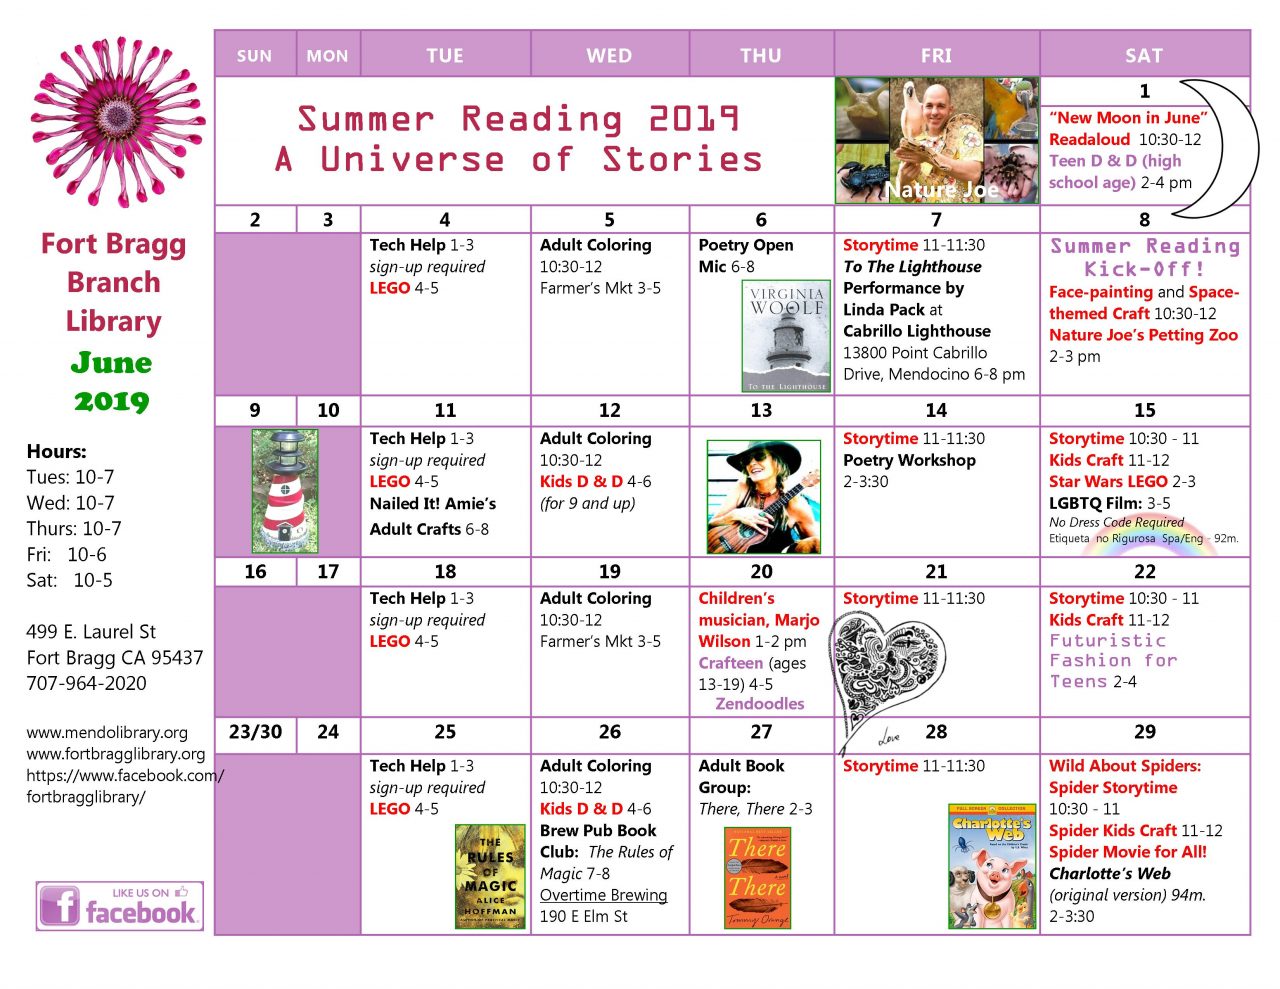 June 2019 Calendar of Events - Fort Bragg Library